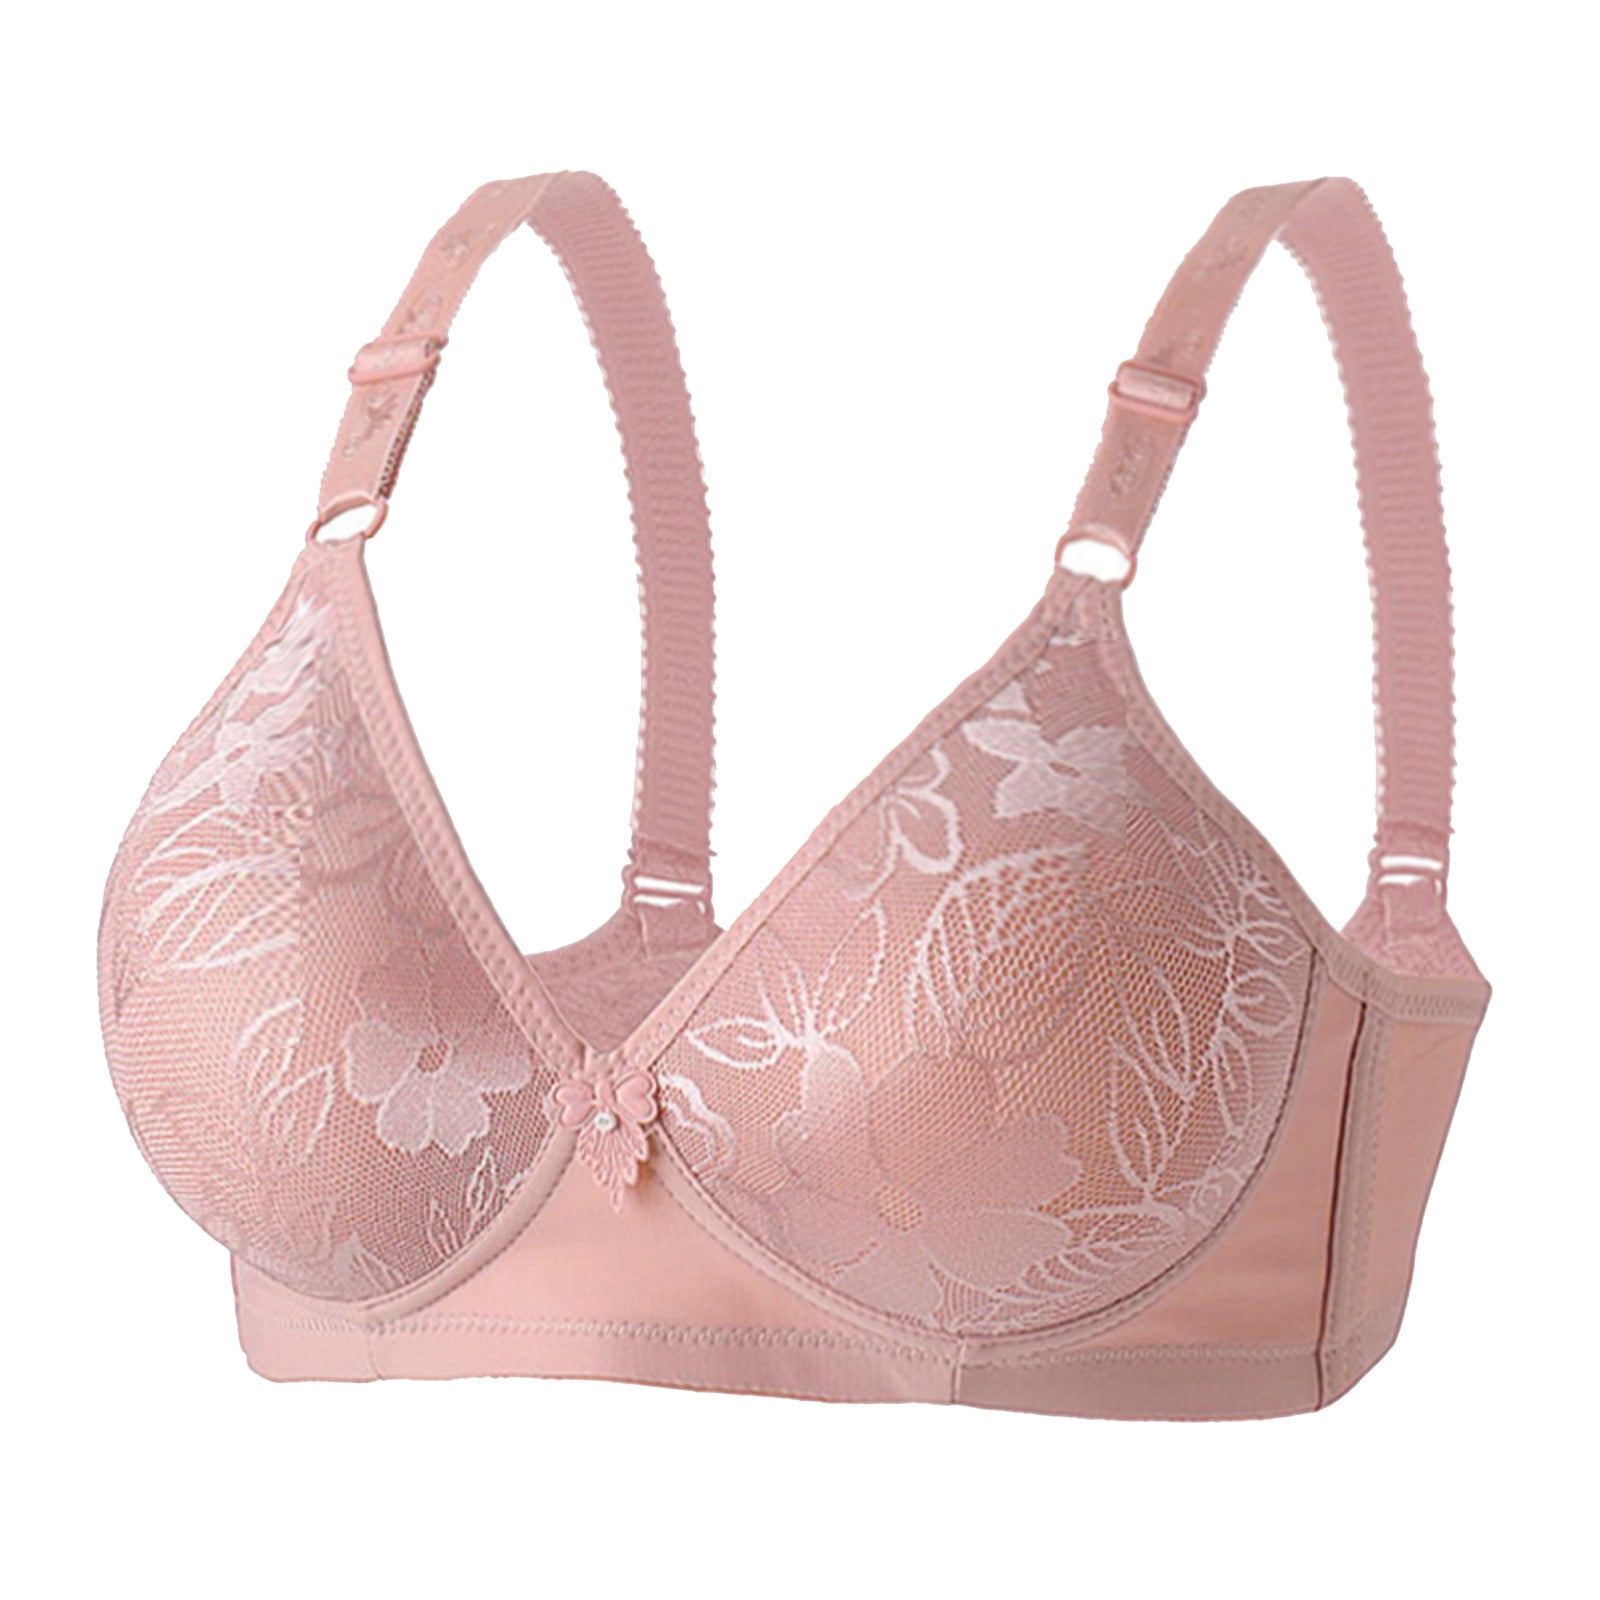 Deagia Honey Love Bras for Women Daily s Plue Size Adjust Full Cup